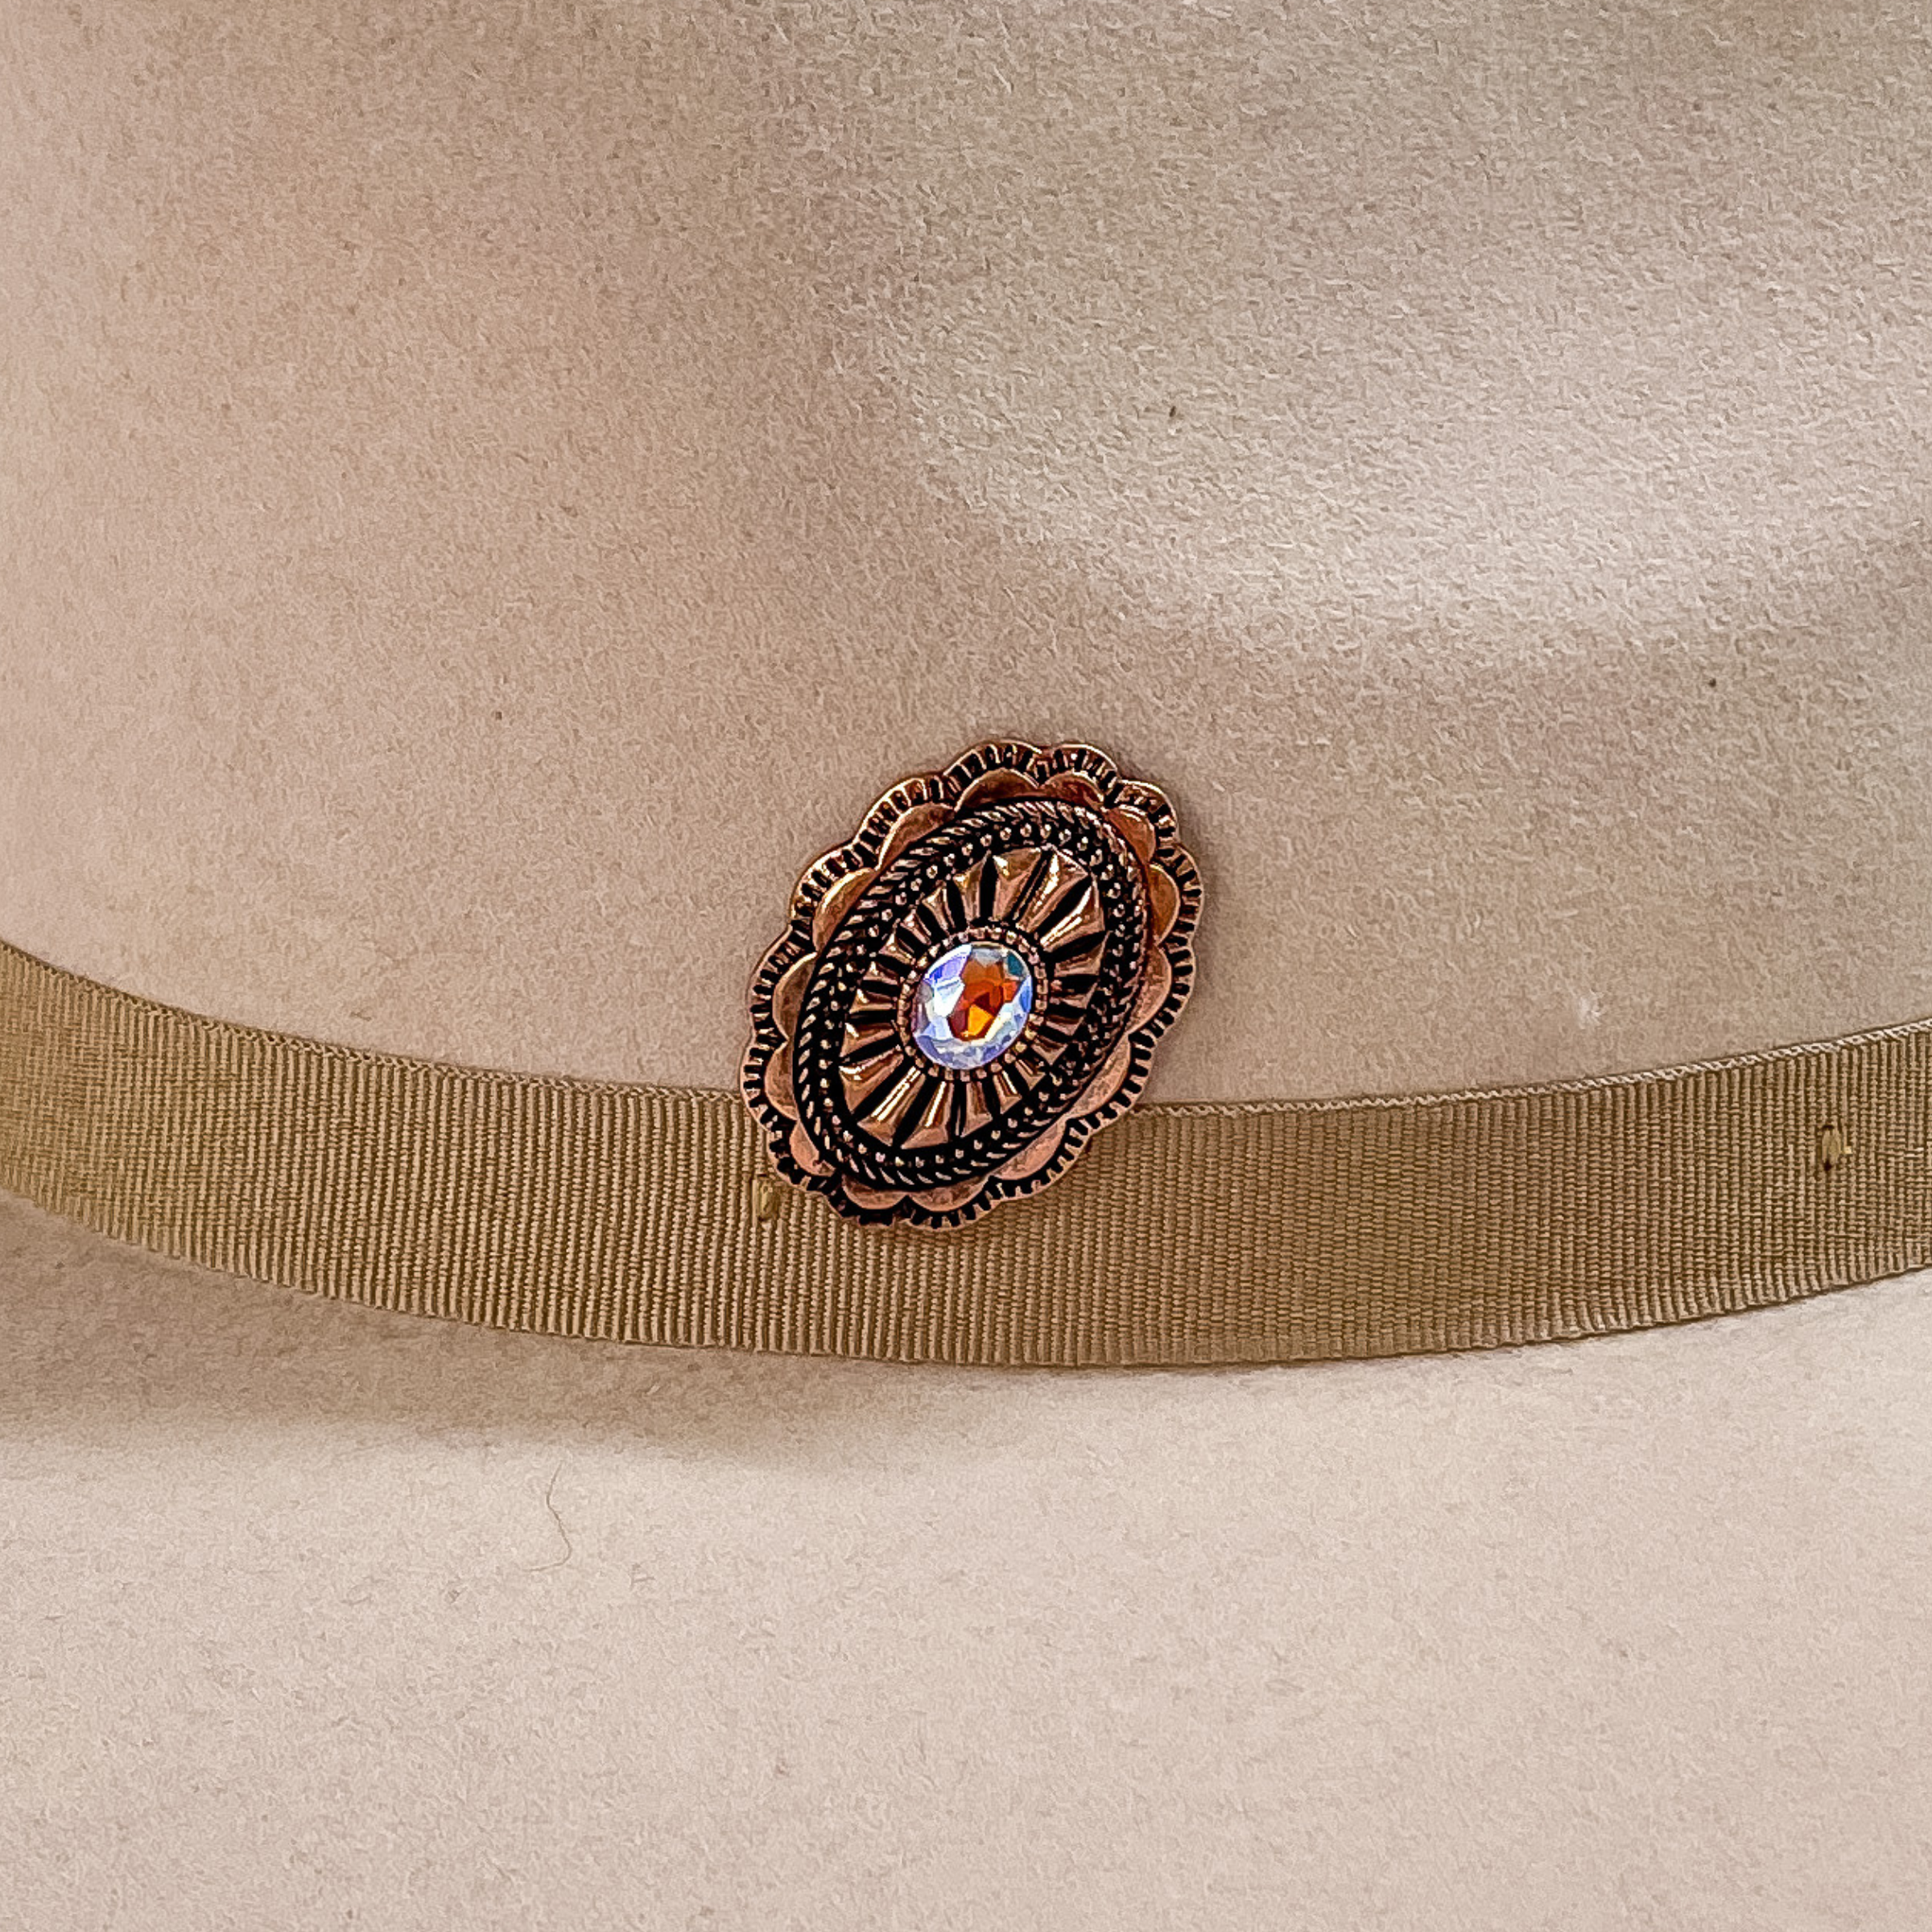 Copper, oval concho with detailed engraving and a center AB crystal hat pin. This hat pin is pictured on a beige hat. 